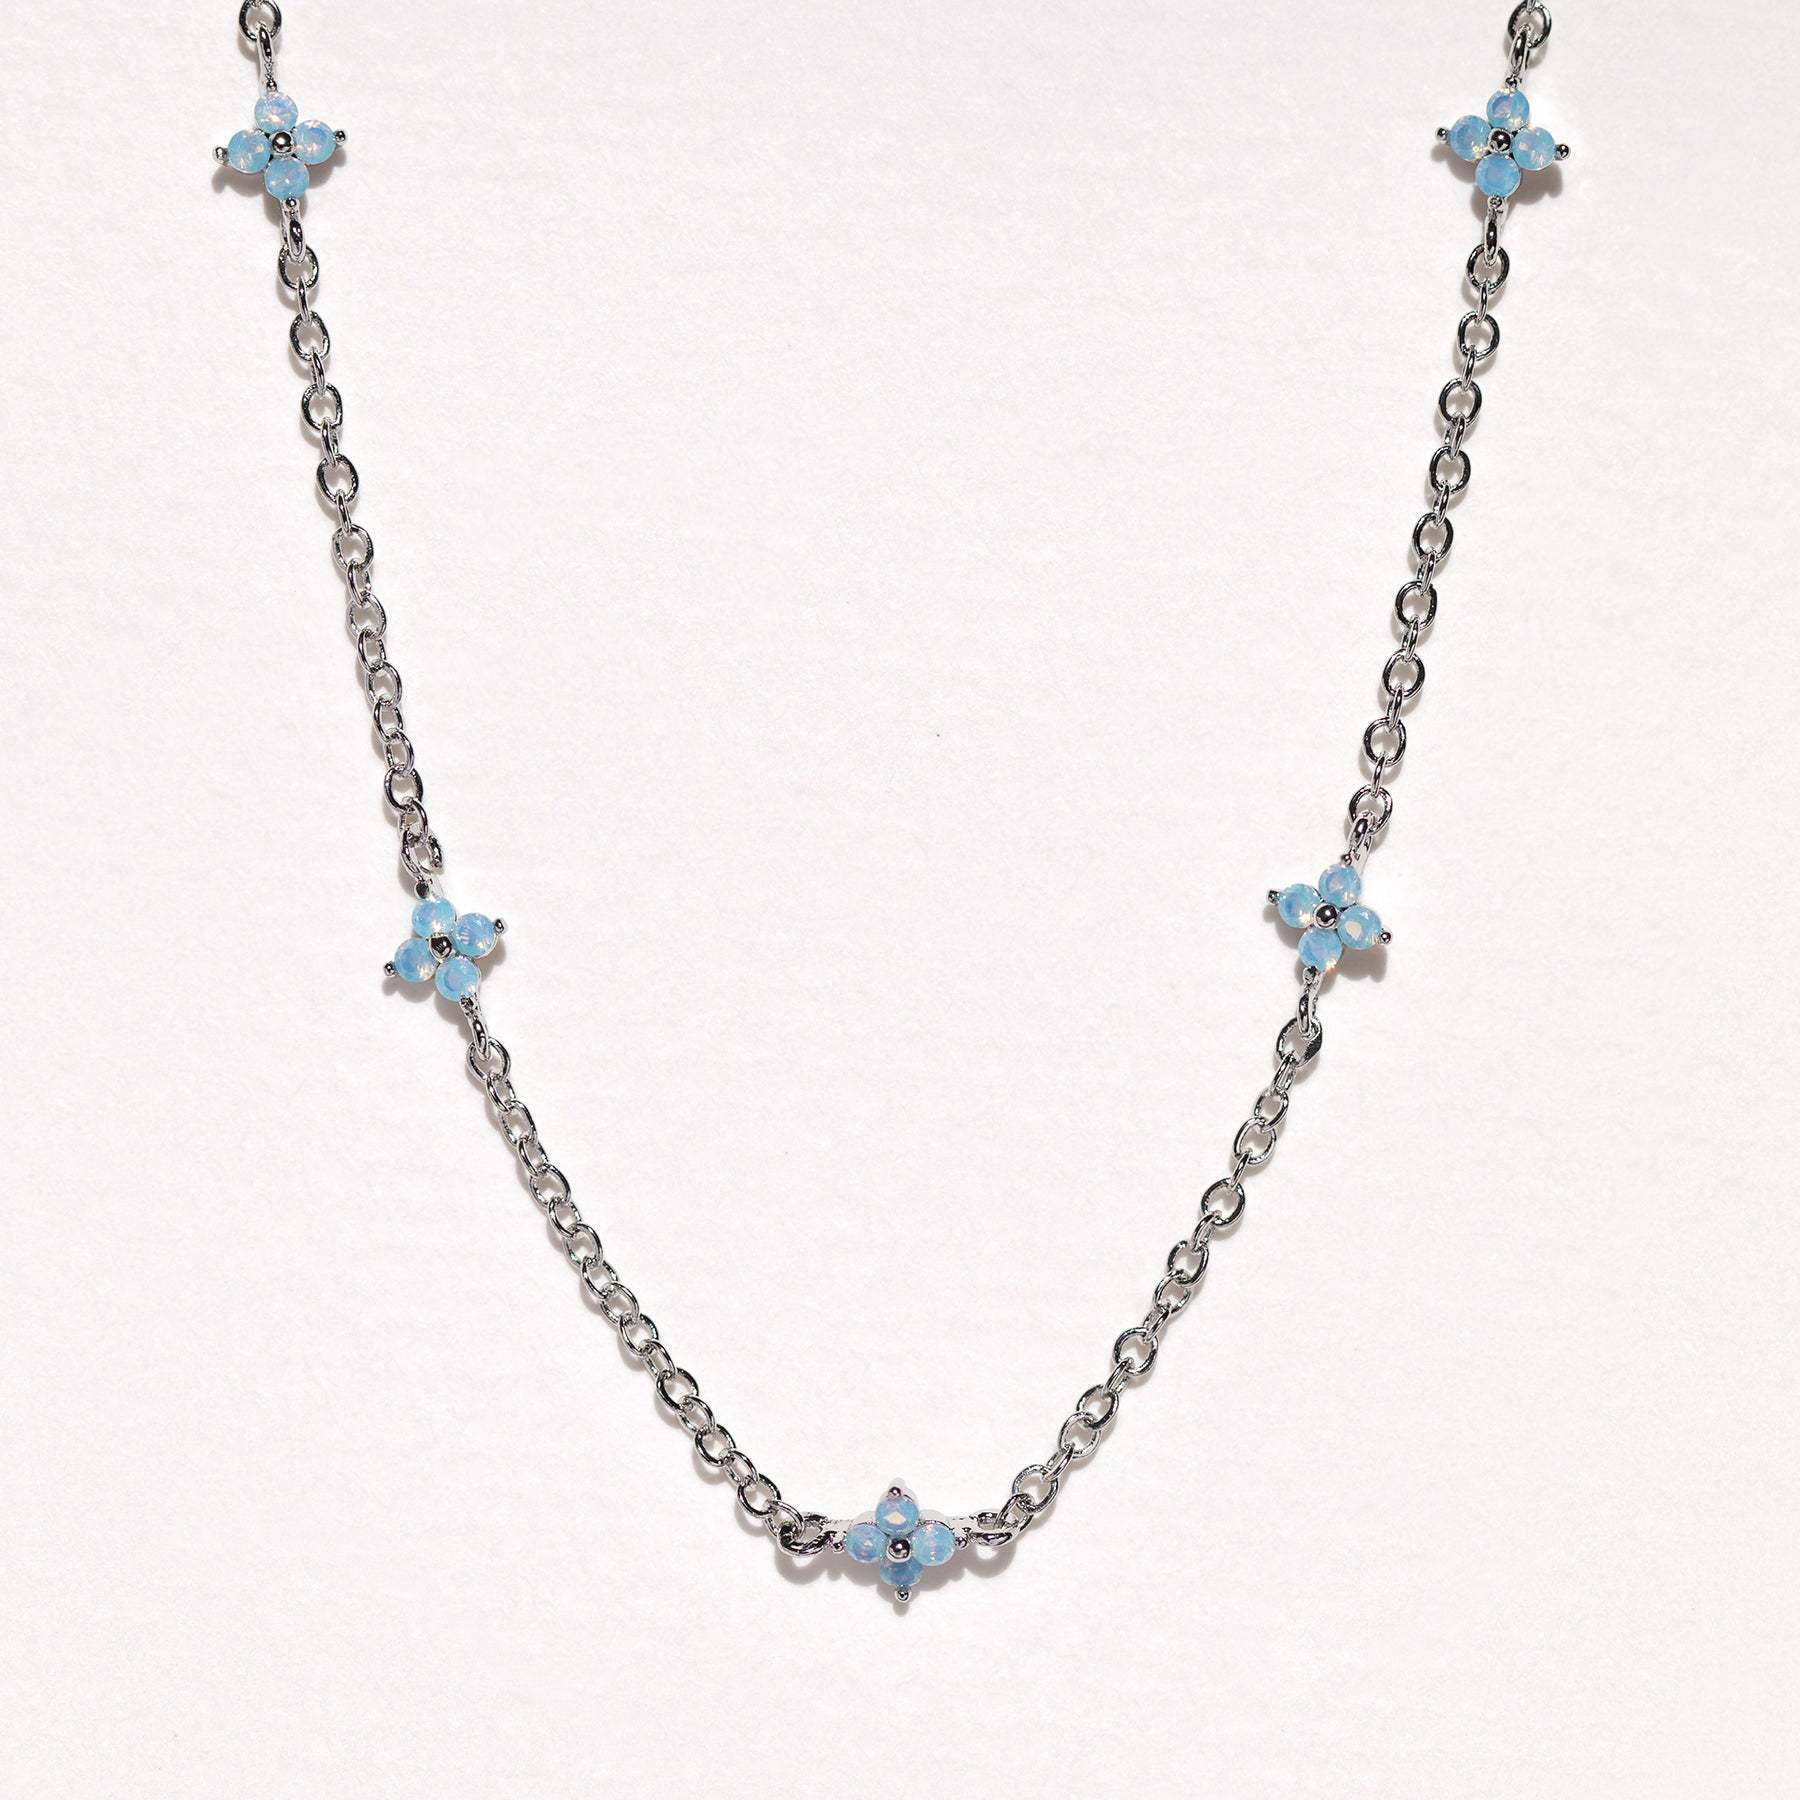 Dainty Blue Floral Necklace